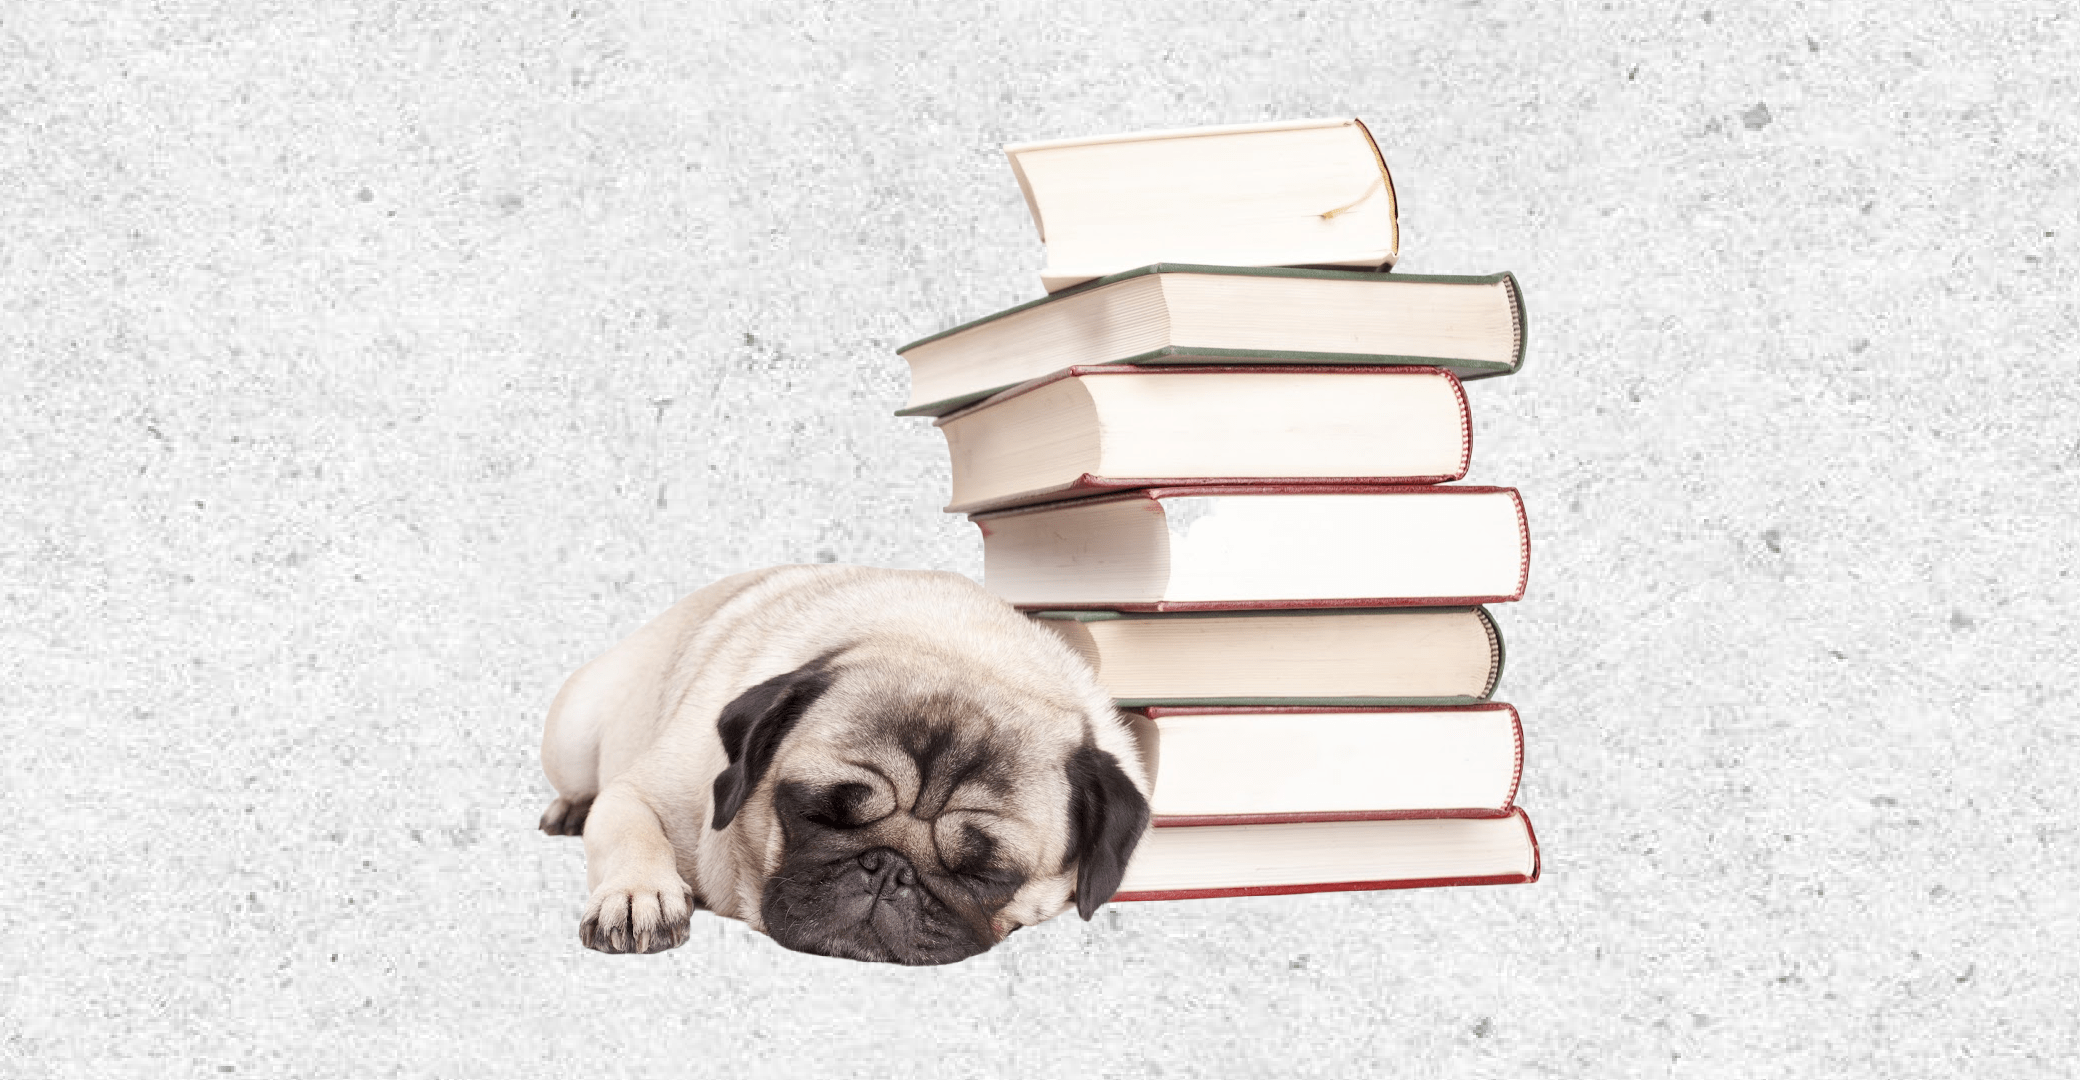 A pug snuggled up next to a stack of books